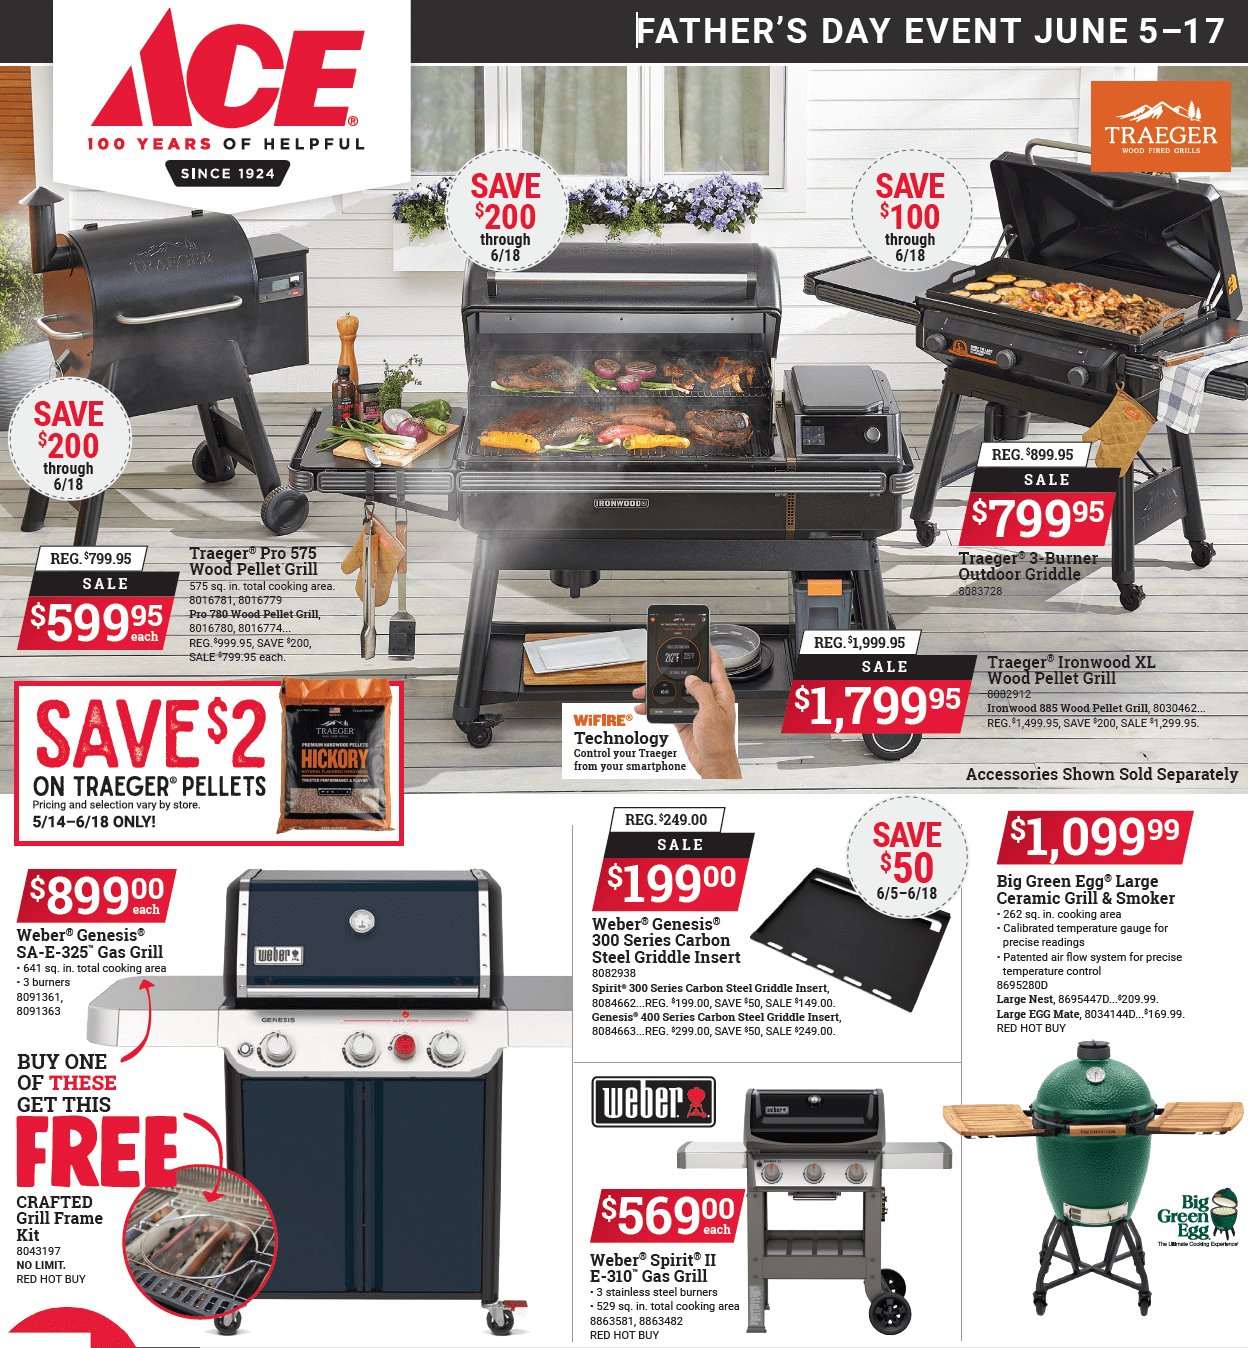 Red Hot Buys - FATHER DAY SALE AT ACE HARDWARE